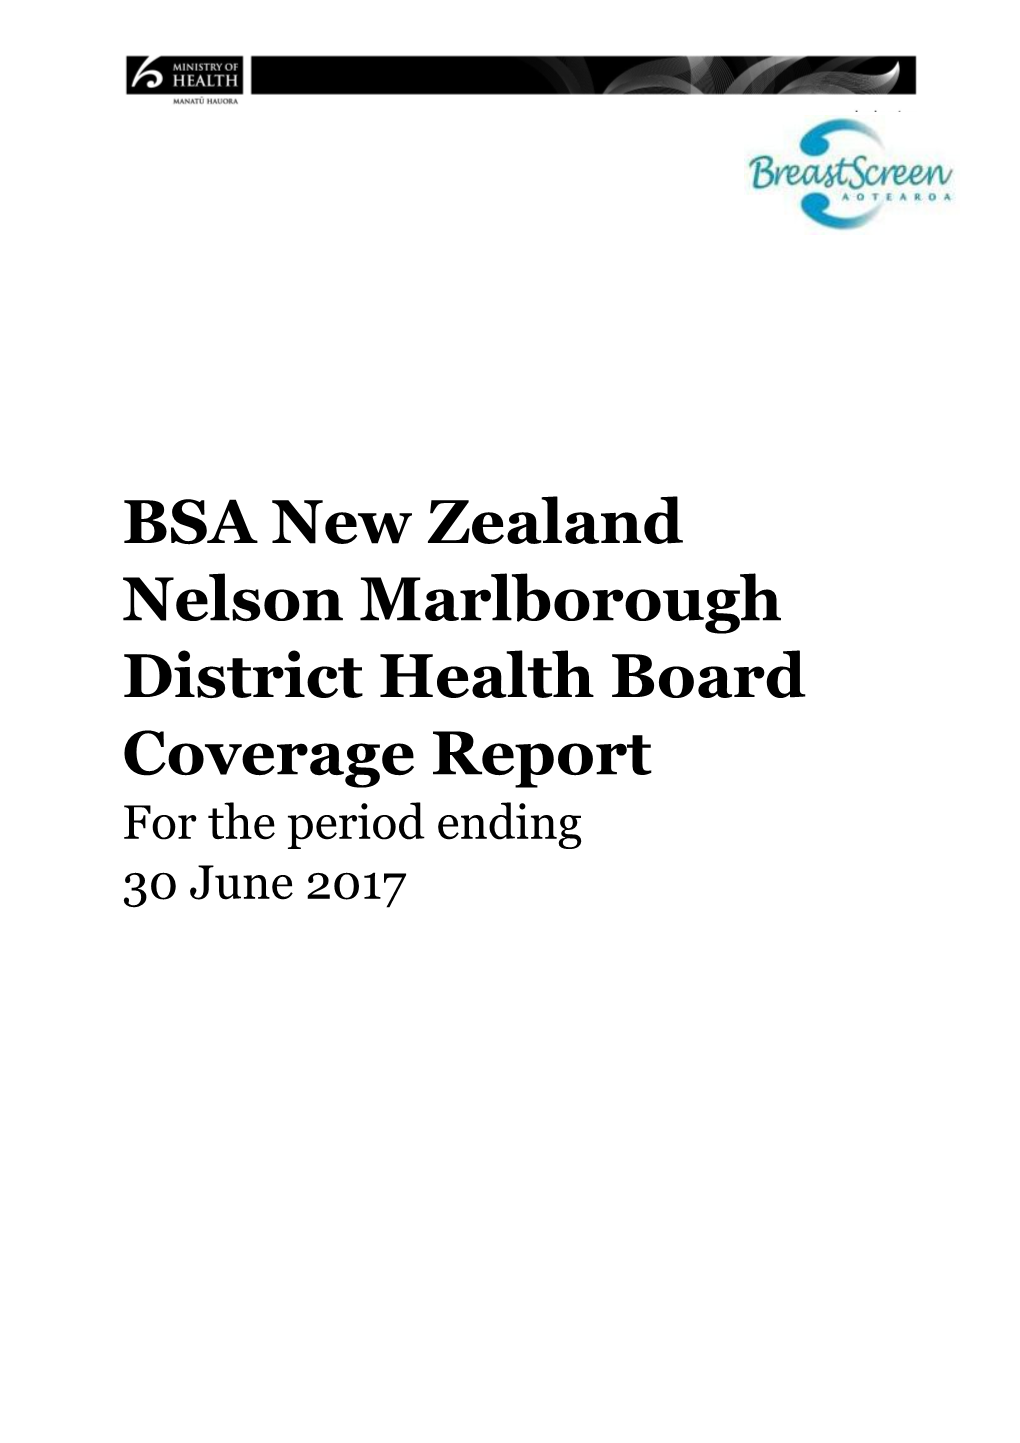 Bsanew Zealand Nelson Marlborough District Health Board Coverage Report